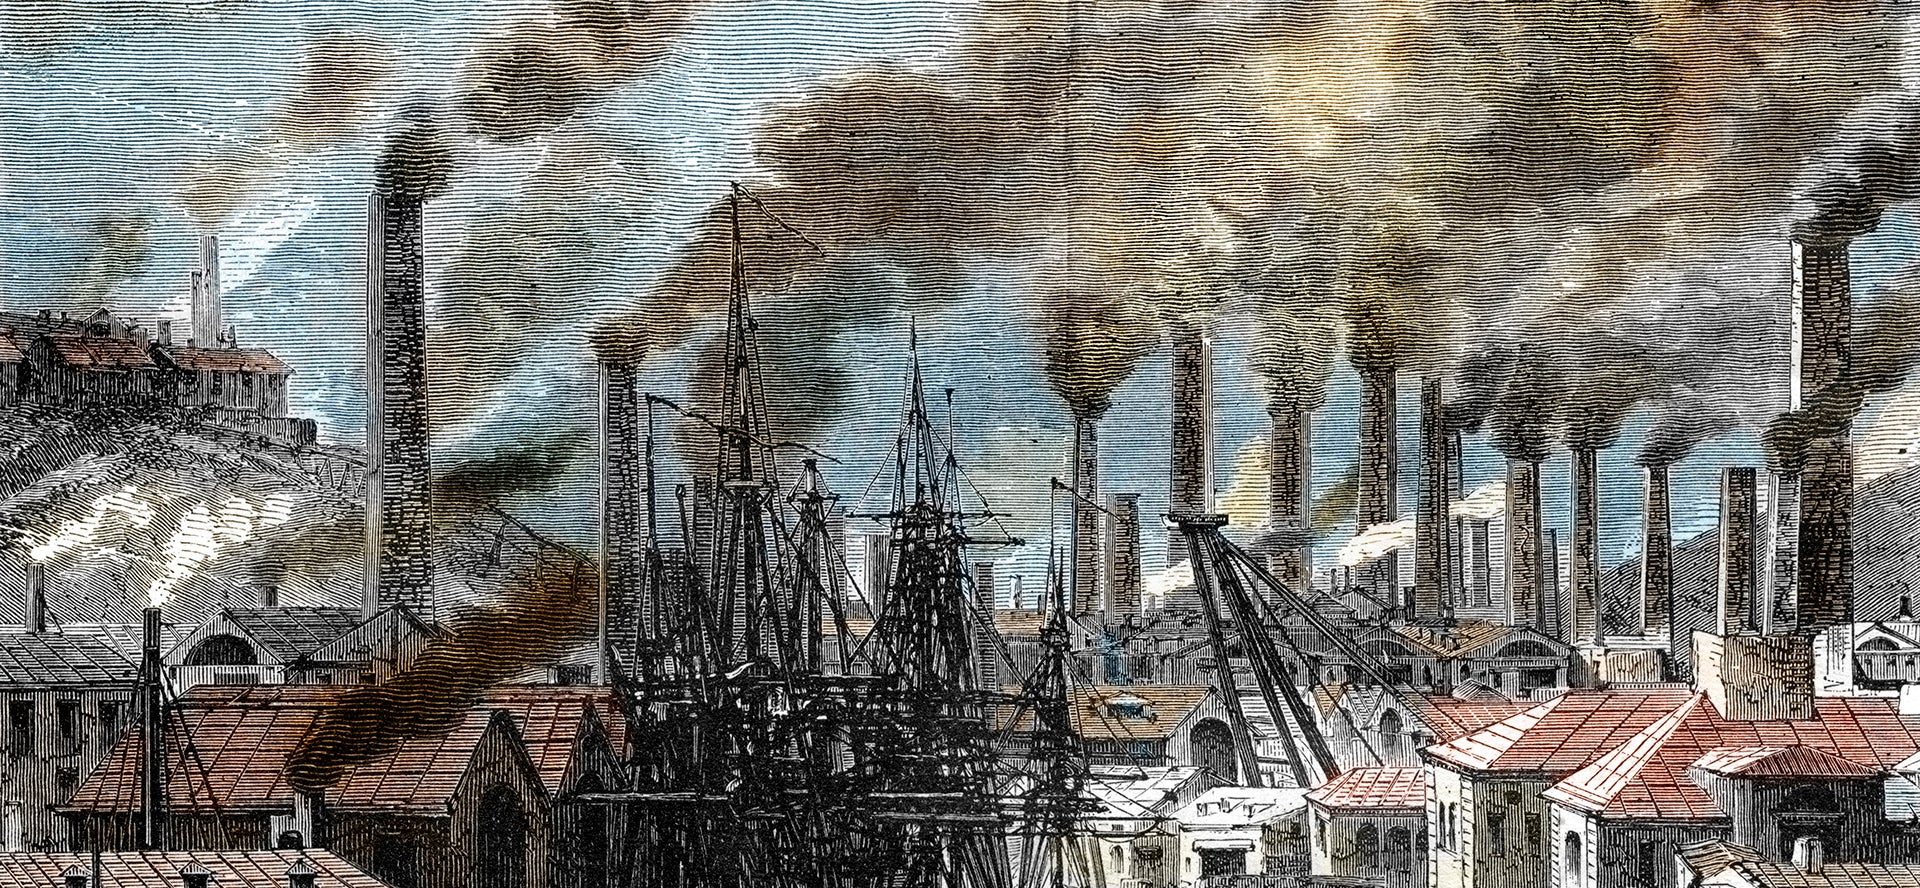 Industrial Revolution _ pollution from copper factories in Cornwall, England; Engraving from History of England by Rollins, 1887